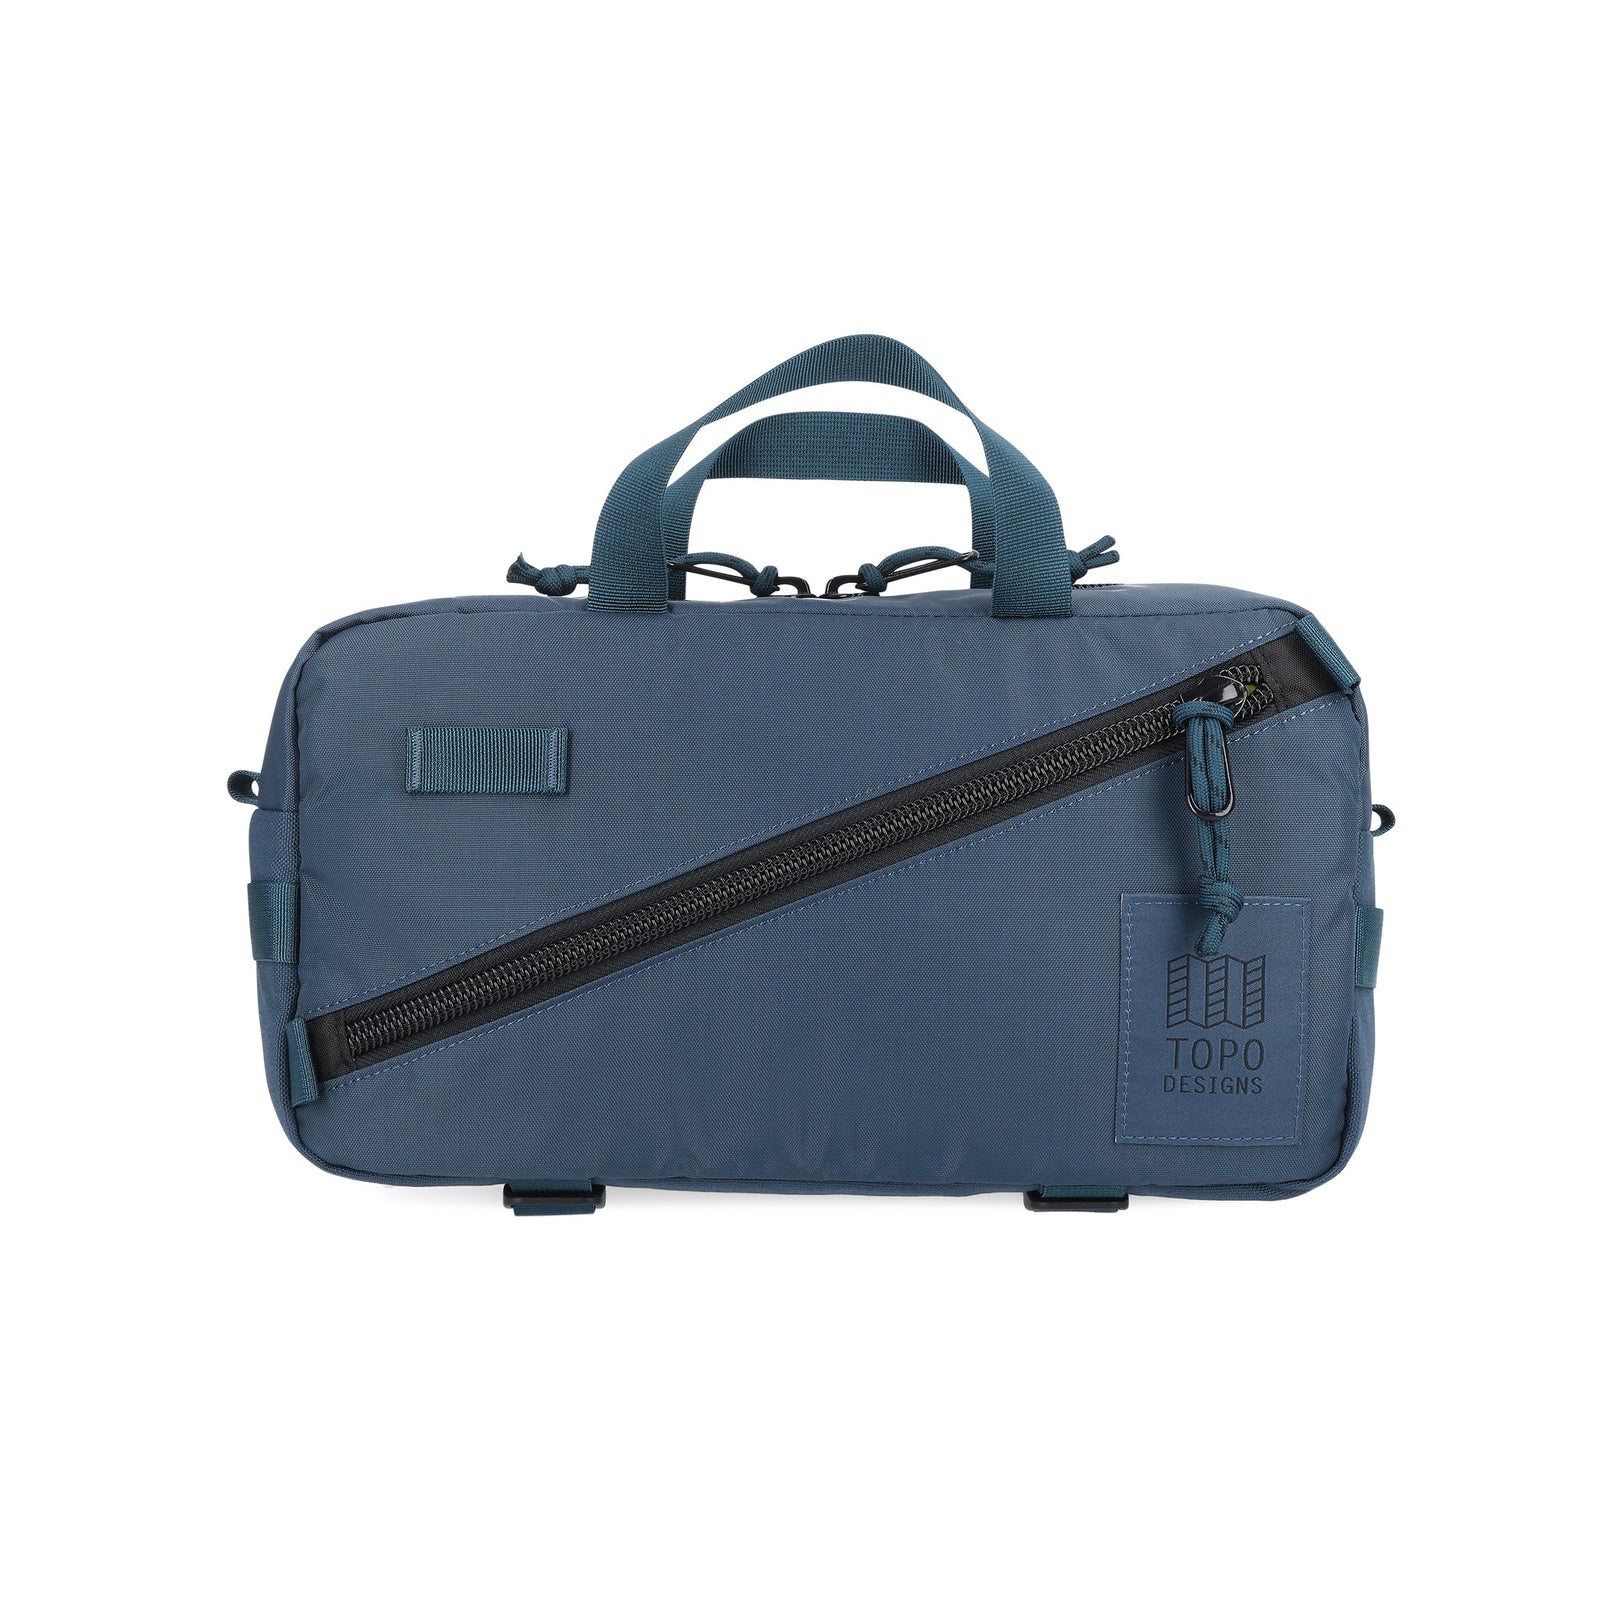 Topo Designs Quick Pack hip fanny pack in "Pond Blue" recycled nylon.